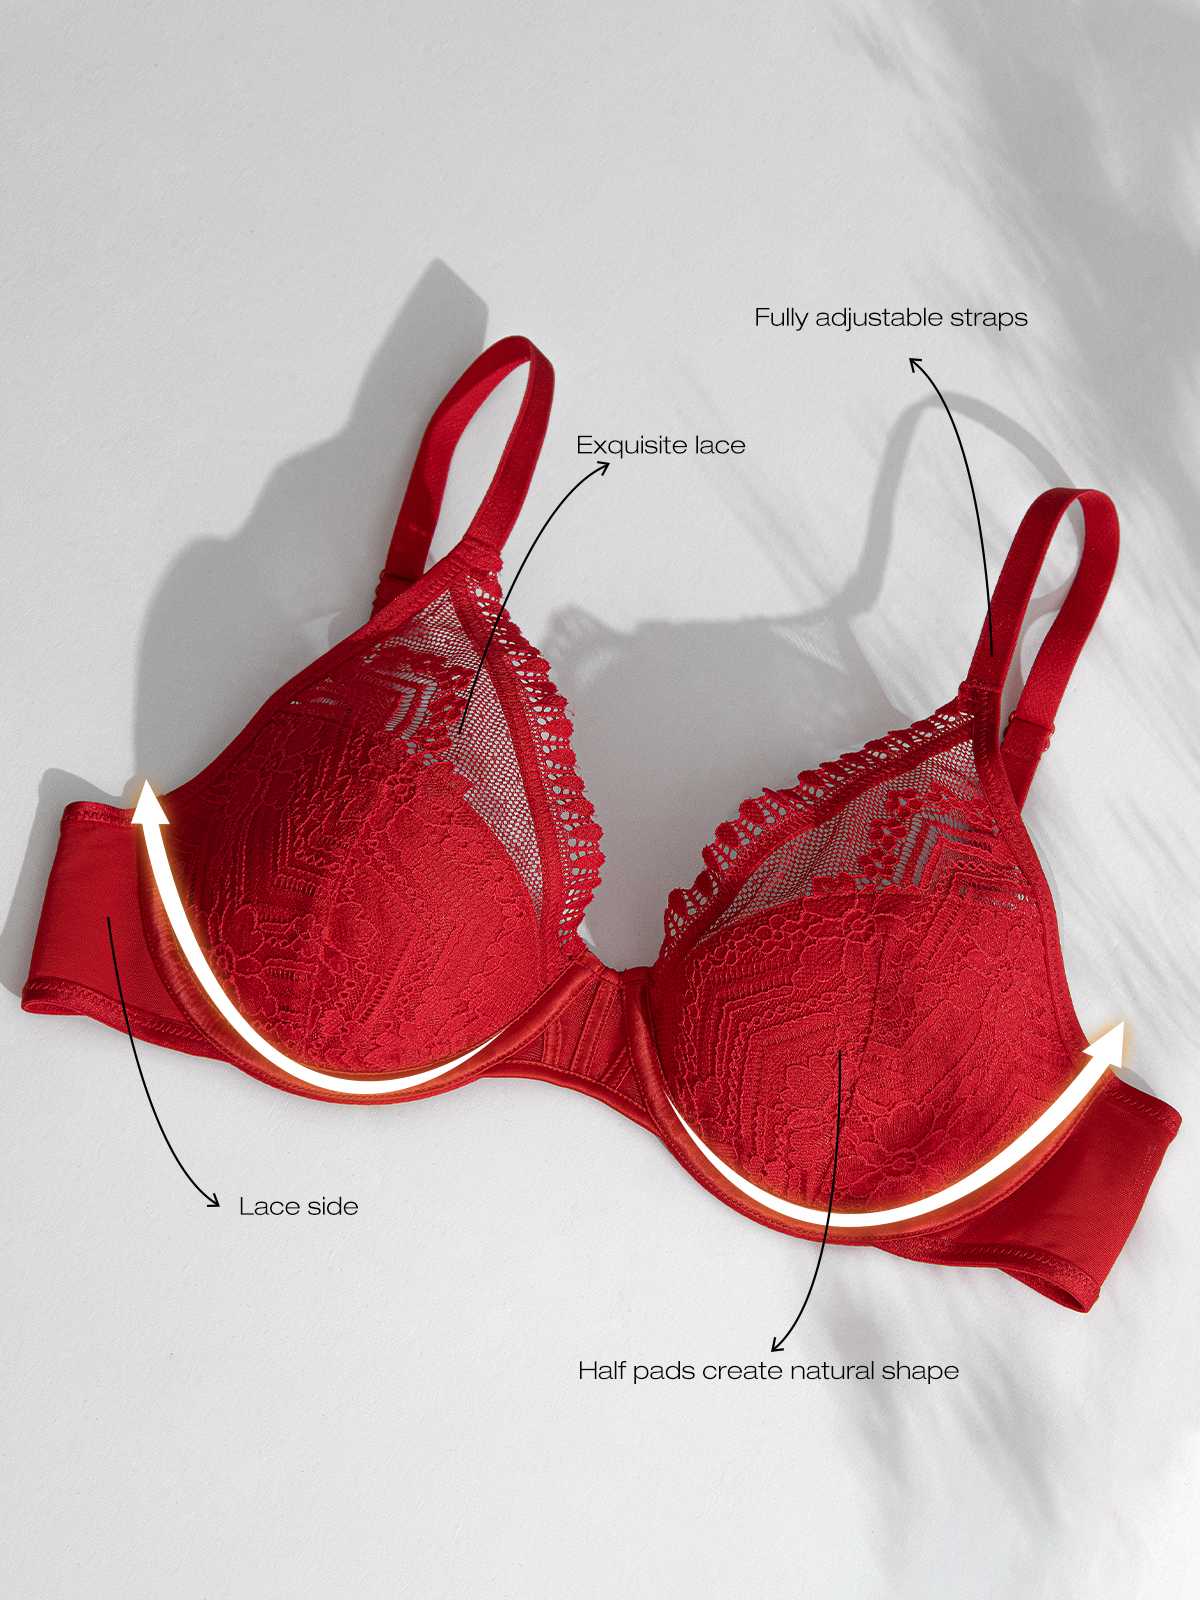 Buy Red Floral Lace Padded Bra 32C, Bras